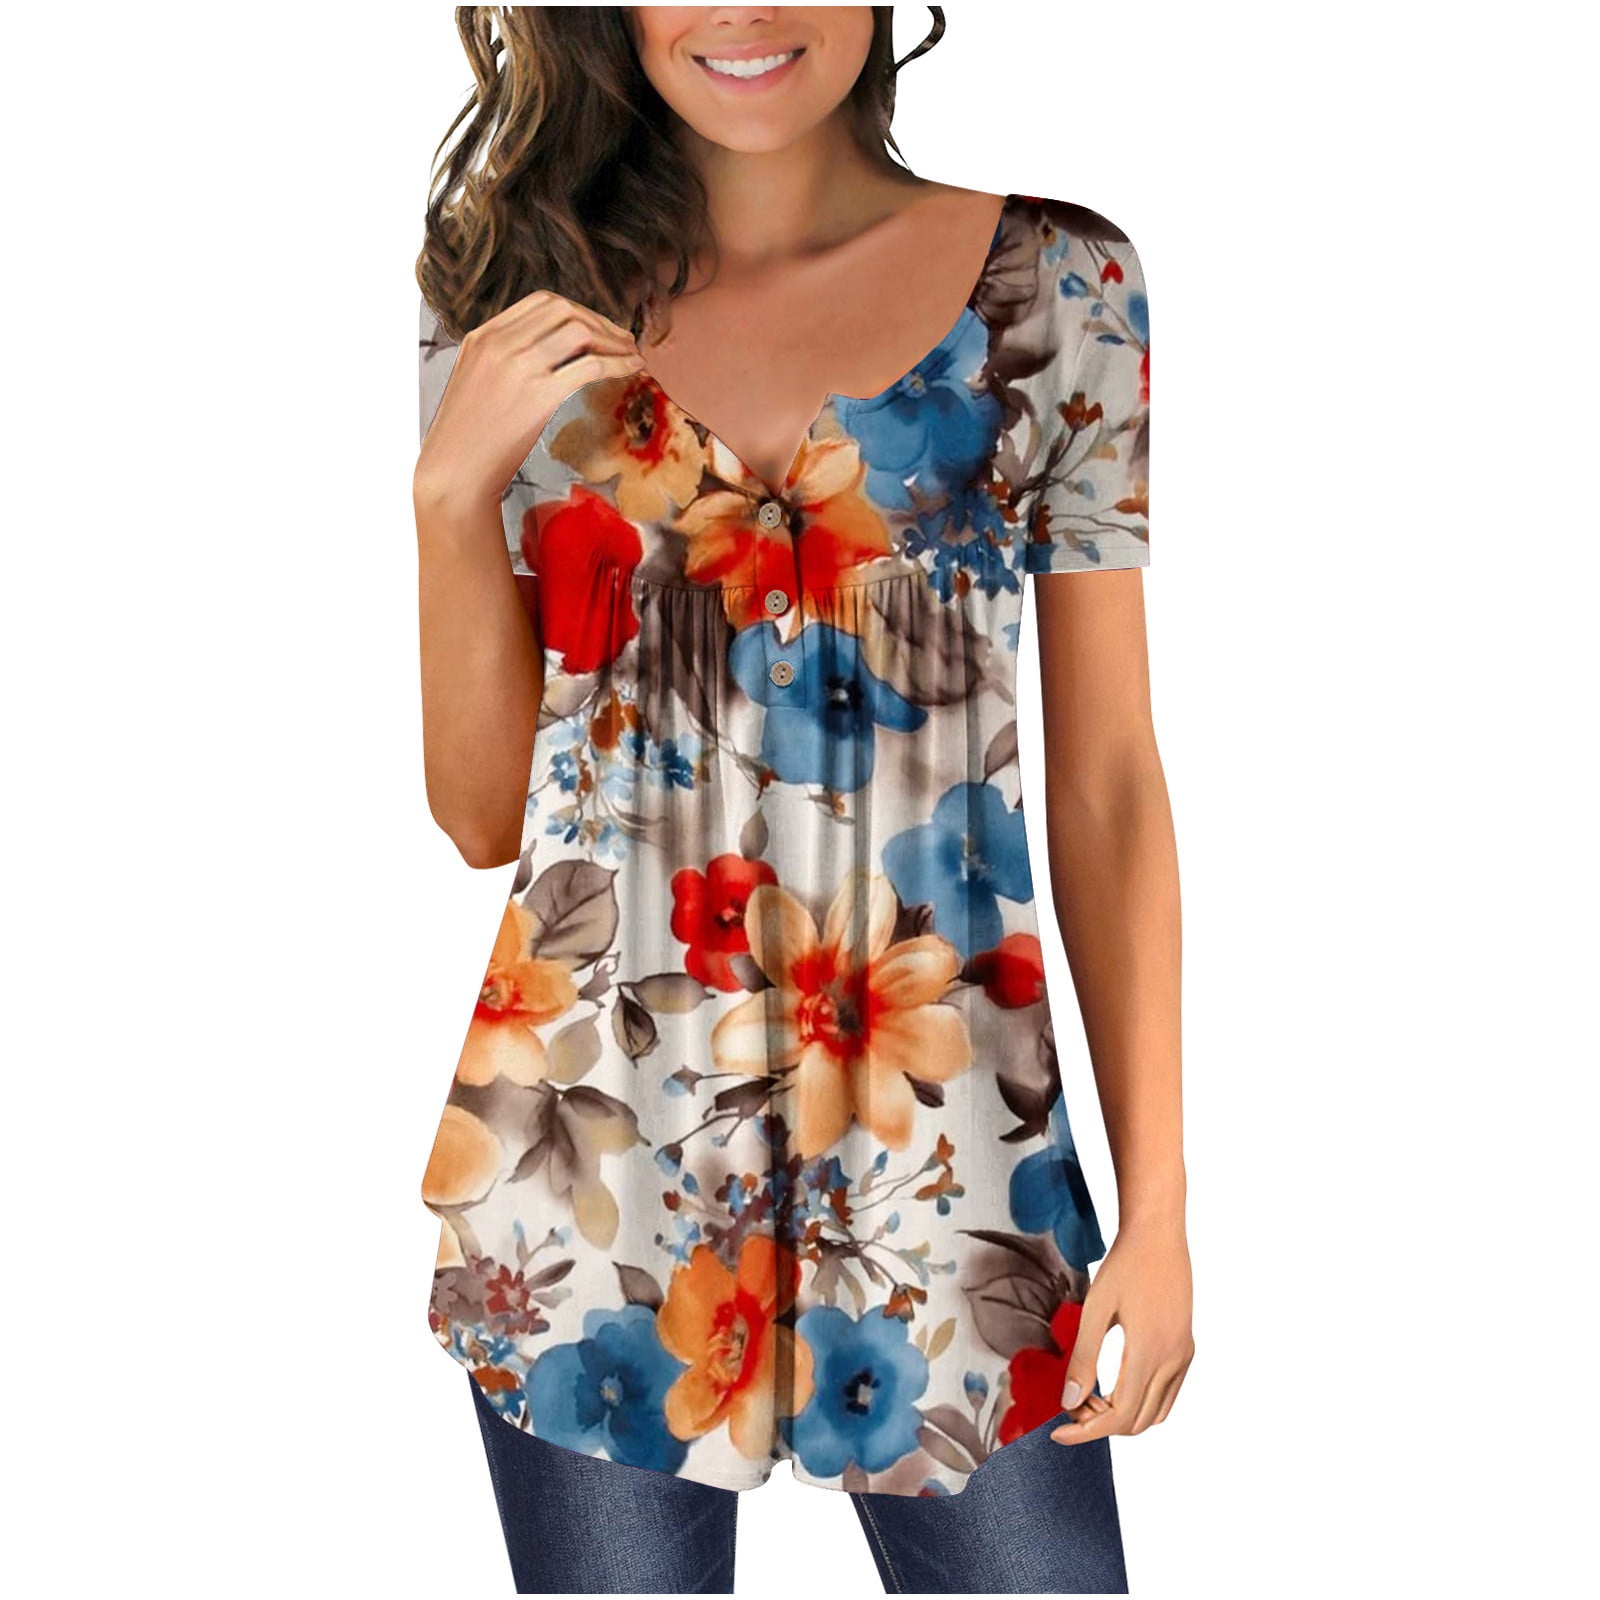 50% off Clear! YOTAMI Blouses for Women Clearance $5 Floral Print Tops ...